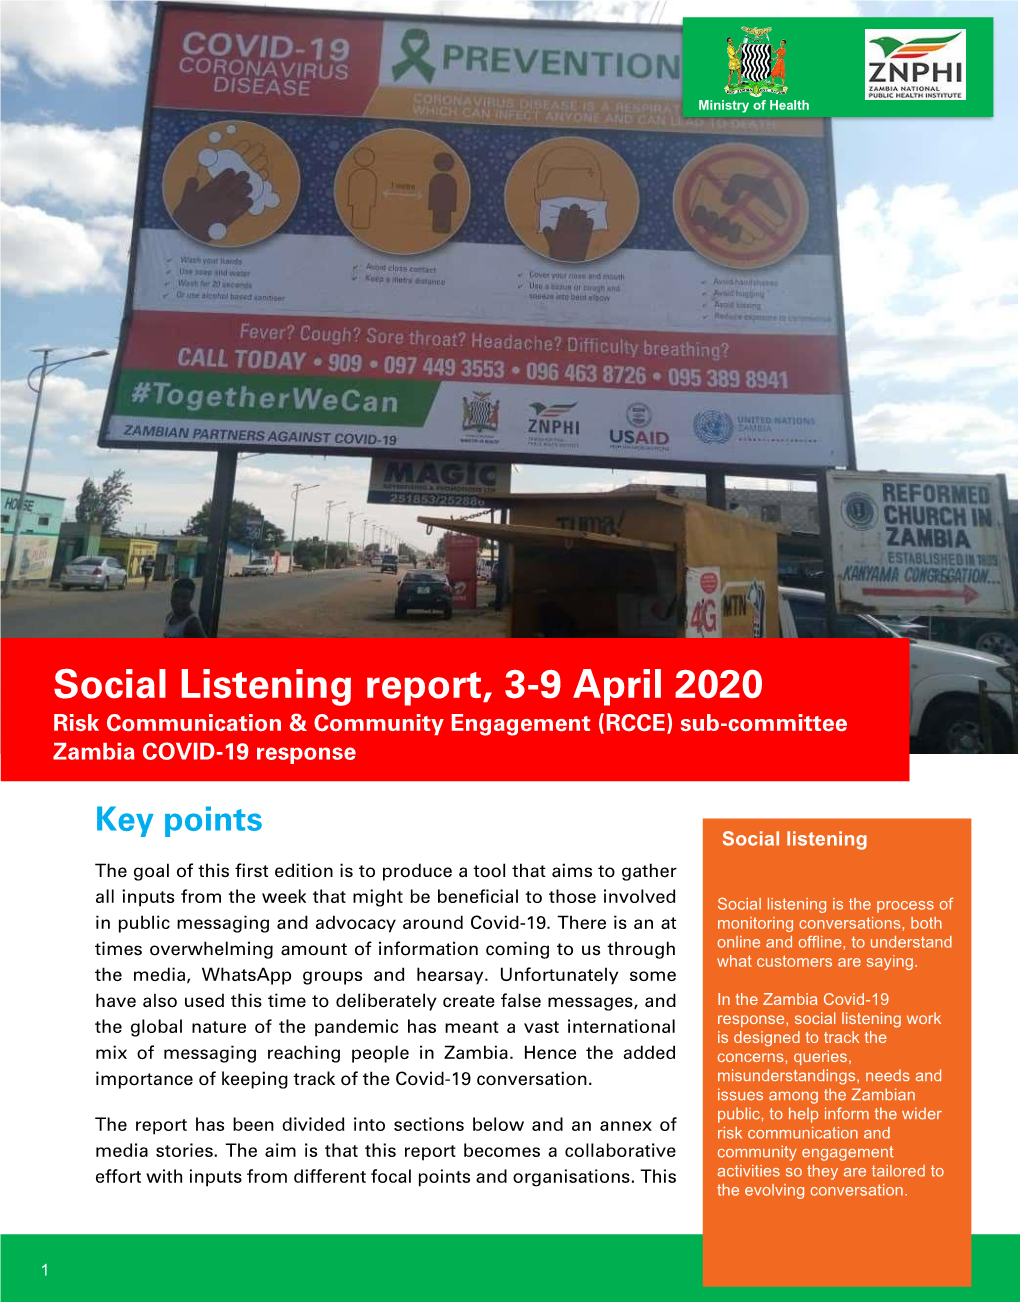 Social Listening Report, 3-9 April 2020 Risk Communication & Community Engagement (RCCE) Sub-Committee Zambia COVID-19 Response